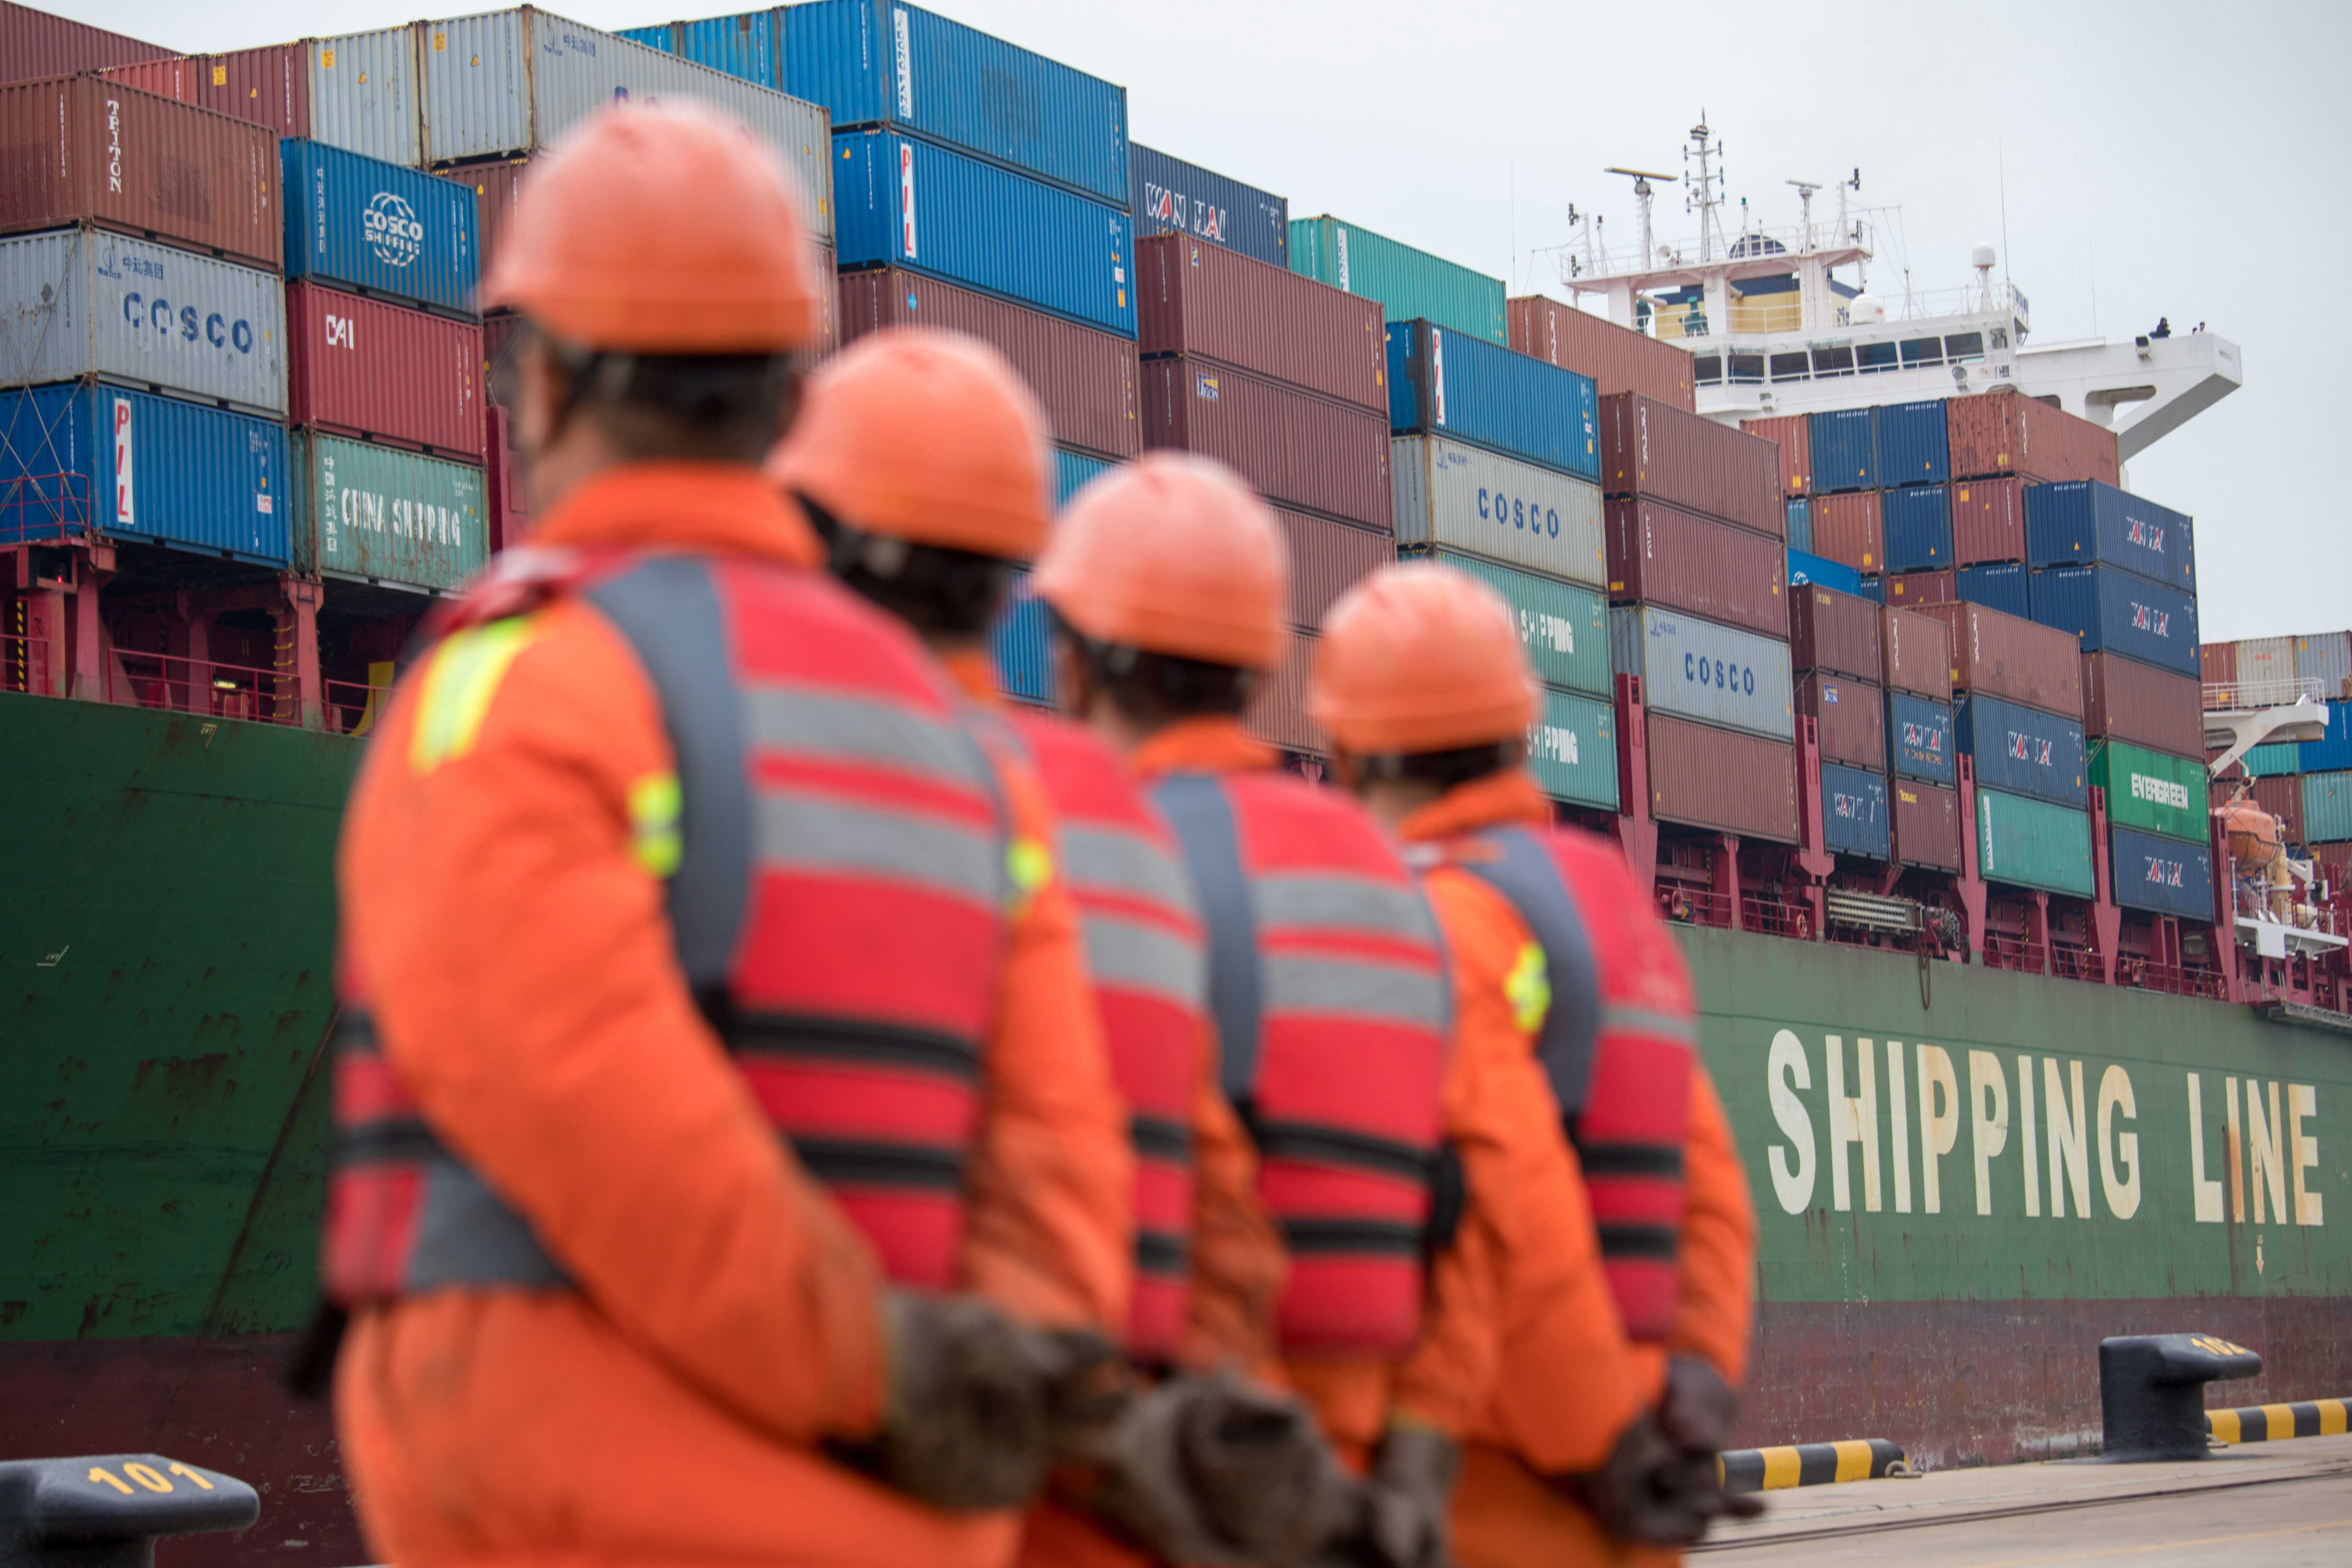 Workers look on as a cargo ship approaches a terminal at the port of Qingdao in Shandong